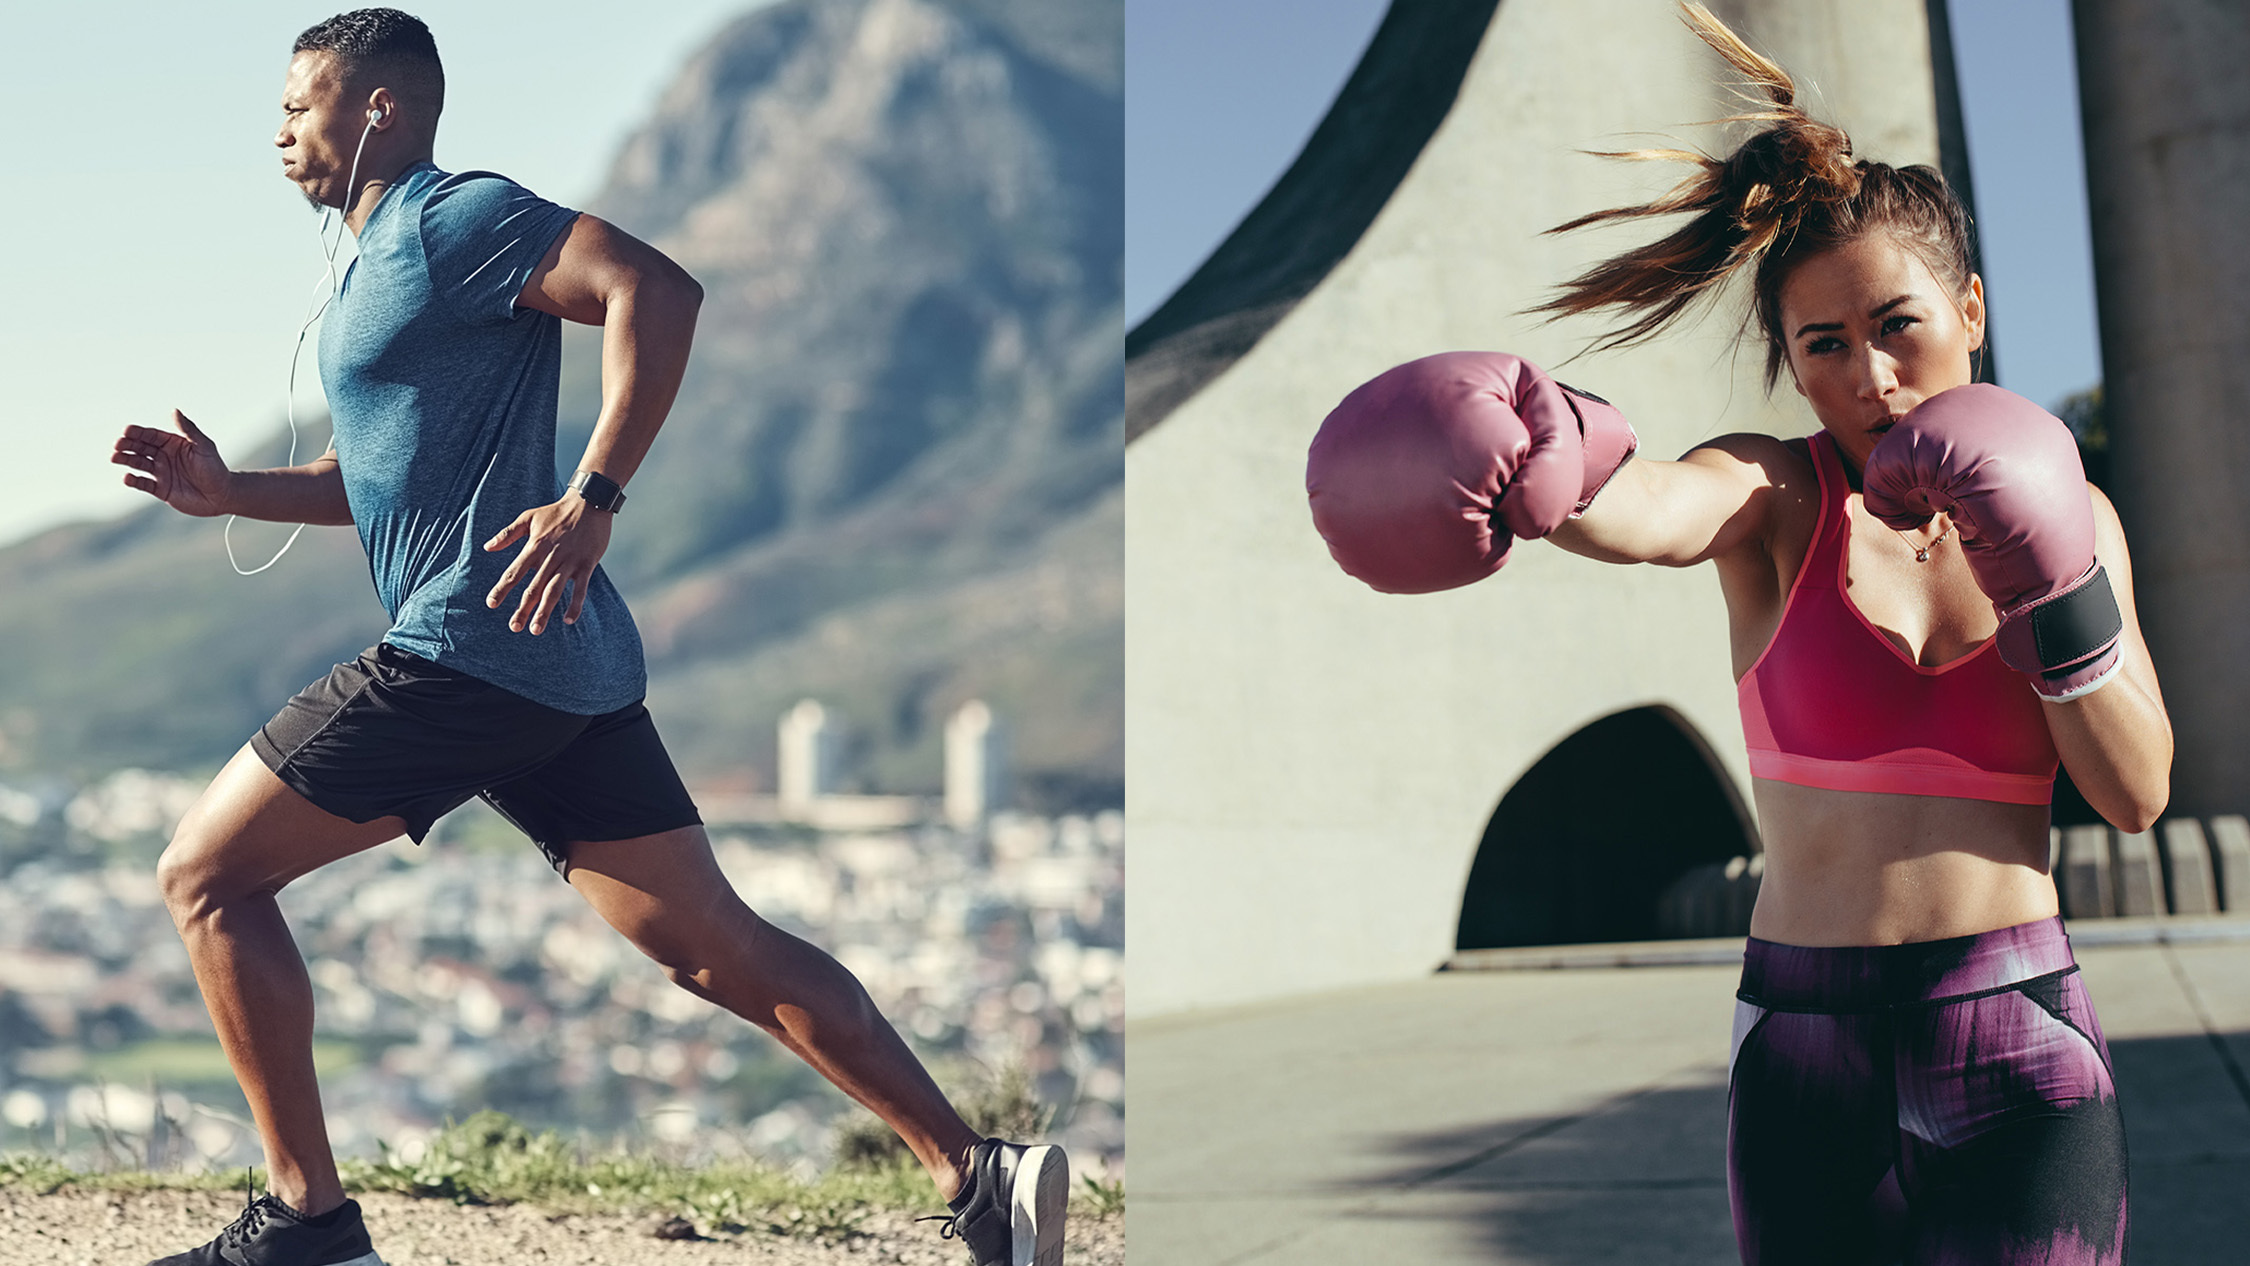 Boxing vs running which burns more calories? Toms Guide